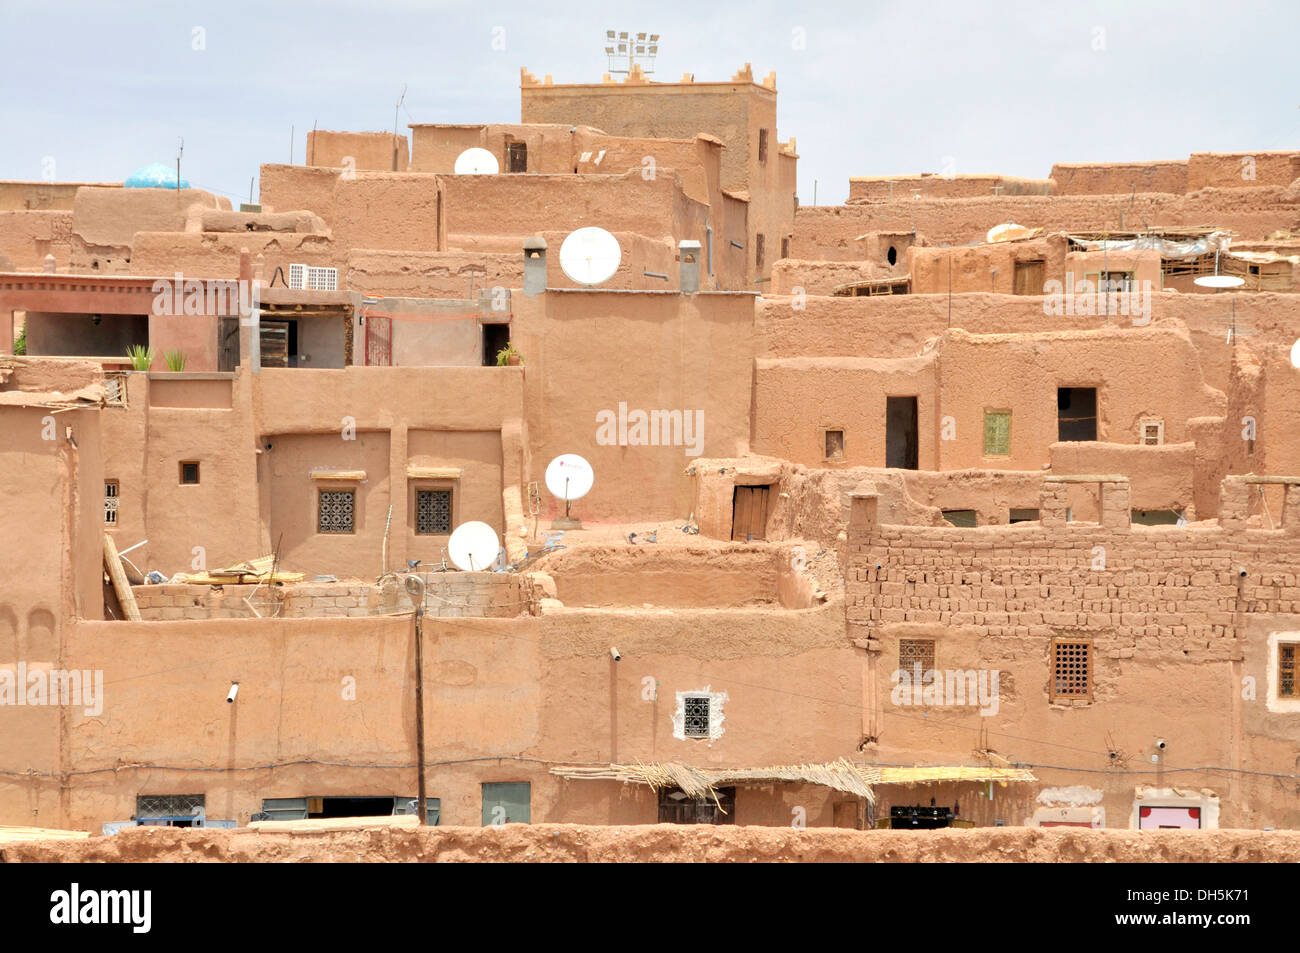 Rammed earth architecture with satellite dishes in the old town or Medina, Ouarzazate, Morocco, Africa Stock Photo